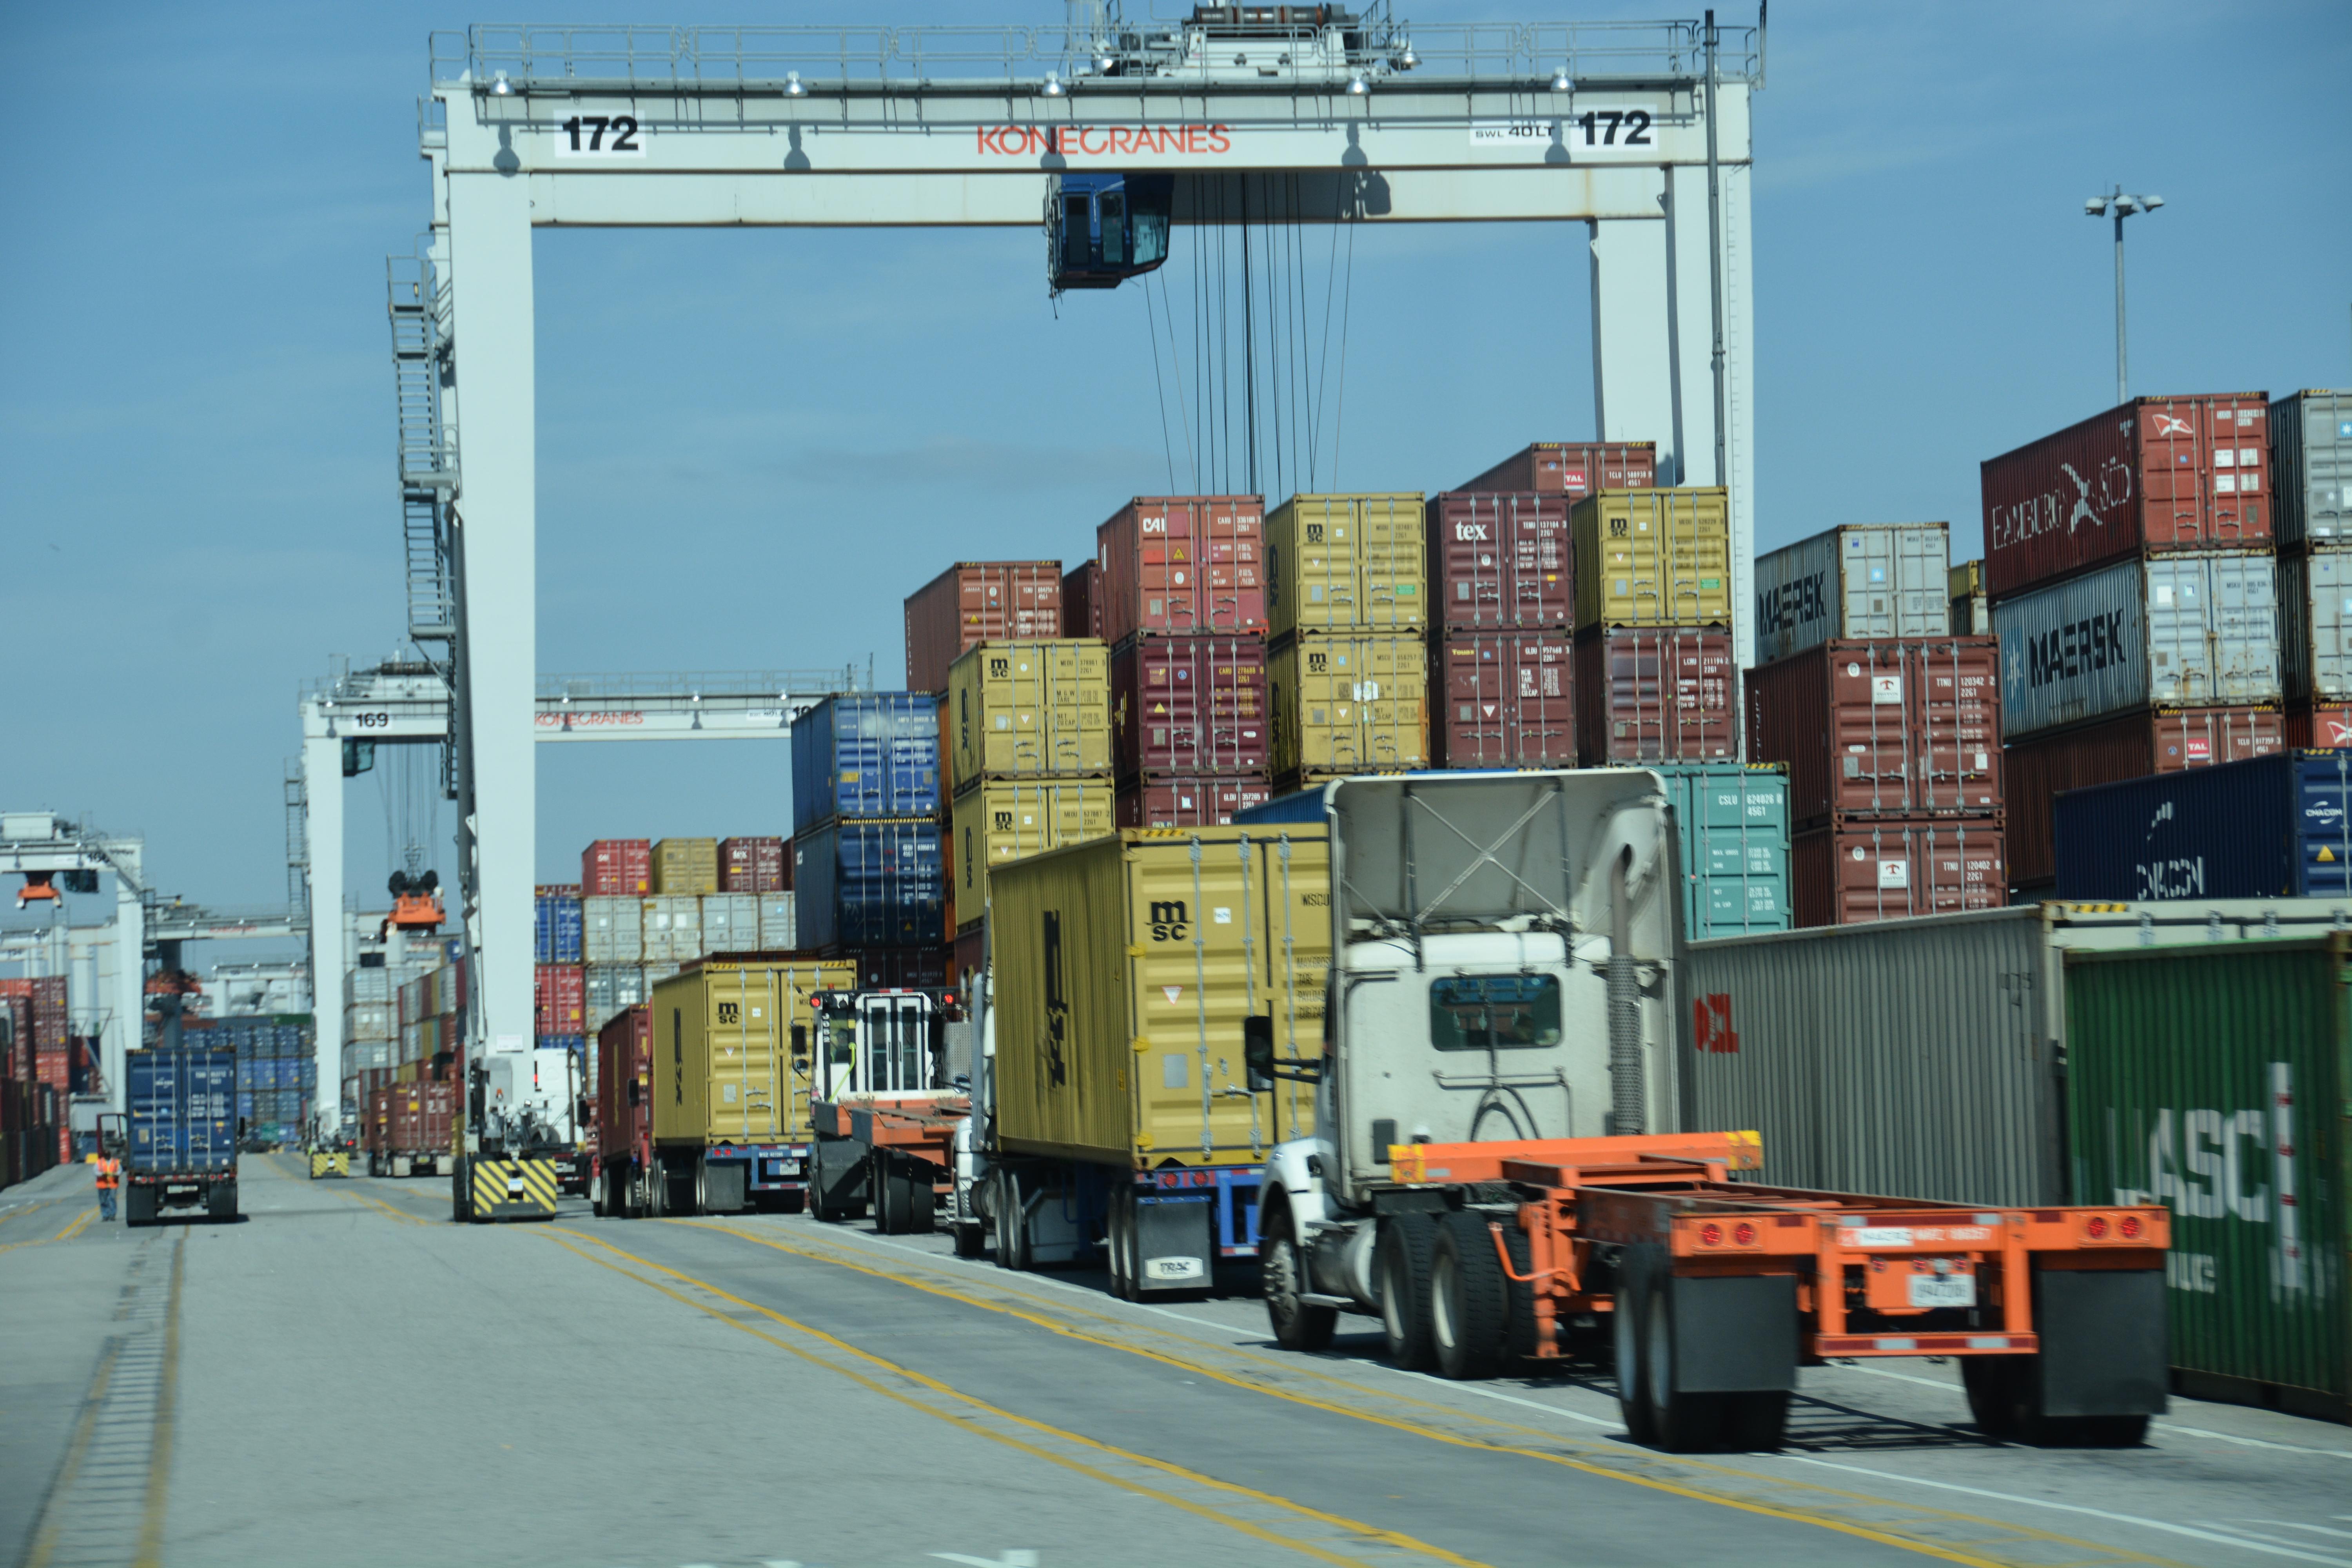 Negotiations between the Coast Longshore Division, a division of the International Longshore and Warehouse Union, and their employers have not been productive for months, causing turmoil at California Ports. (Photo by Chris Clayton)